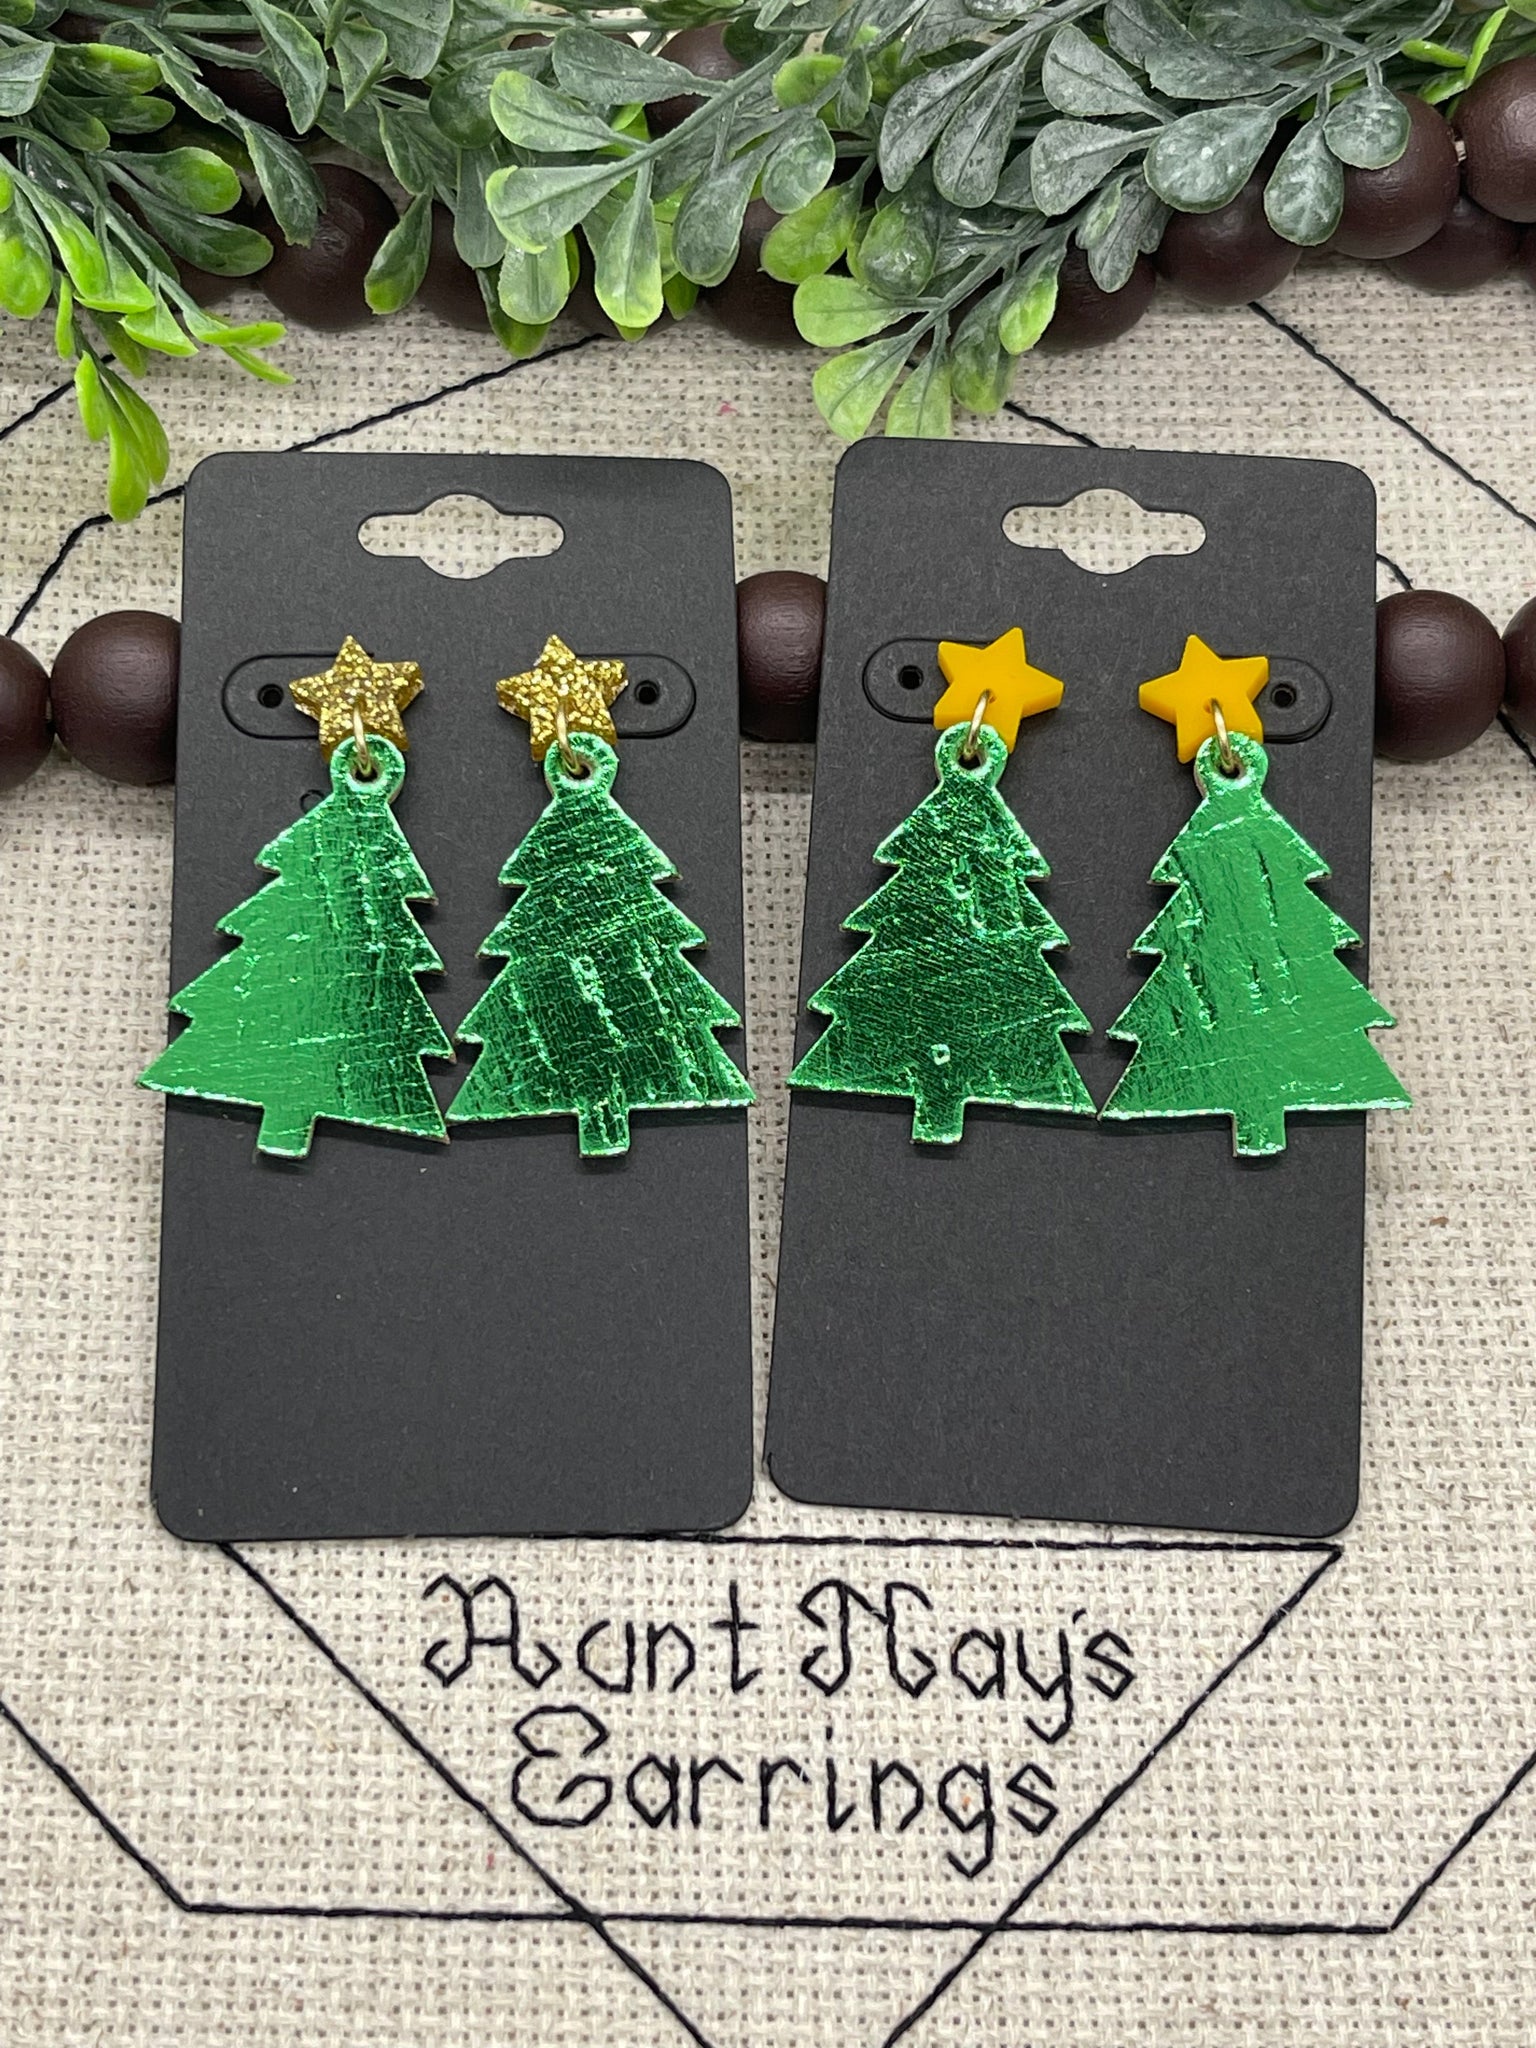 Metallic Green Christmas Tree Shaped Cork on Leather Earrings with Star Topper